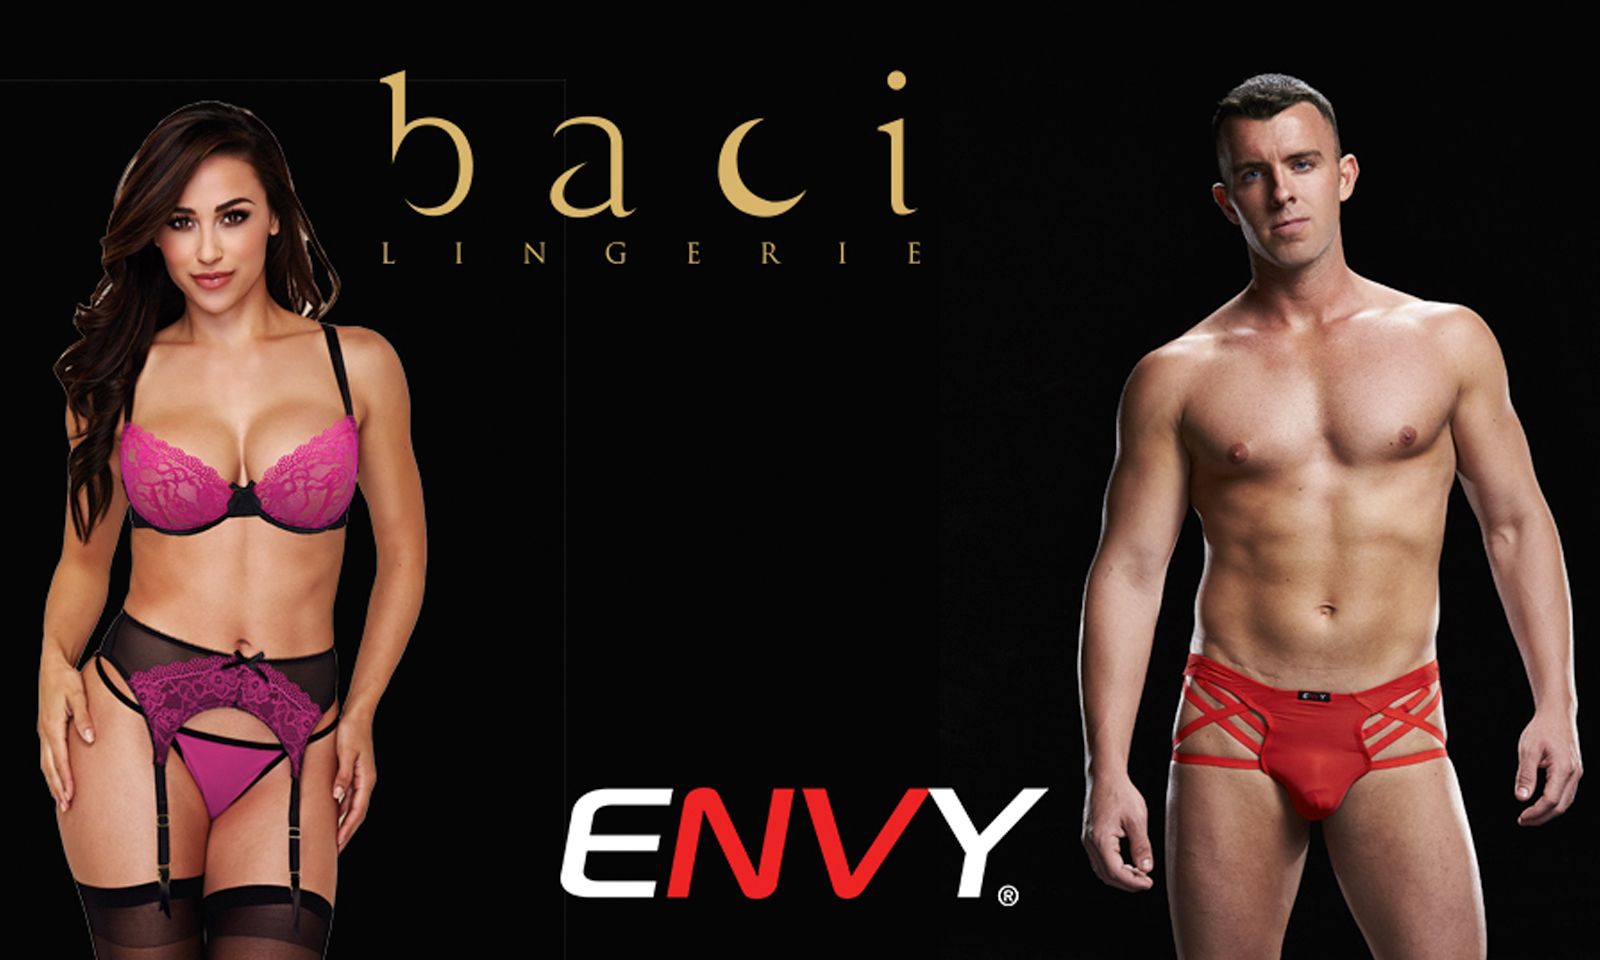 New Styles Coming From Baci, Envy Menswear